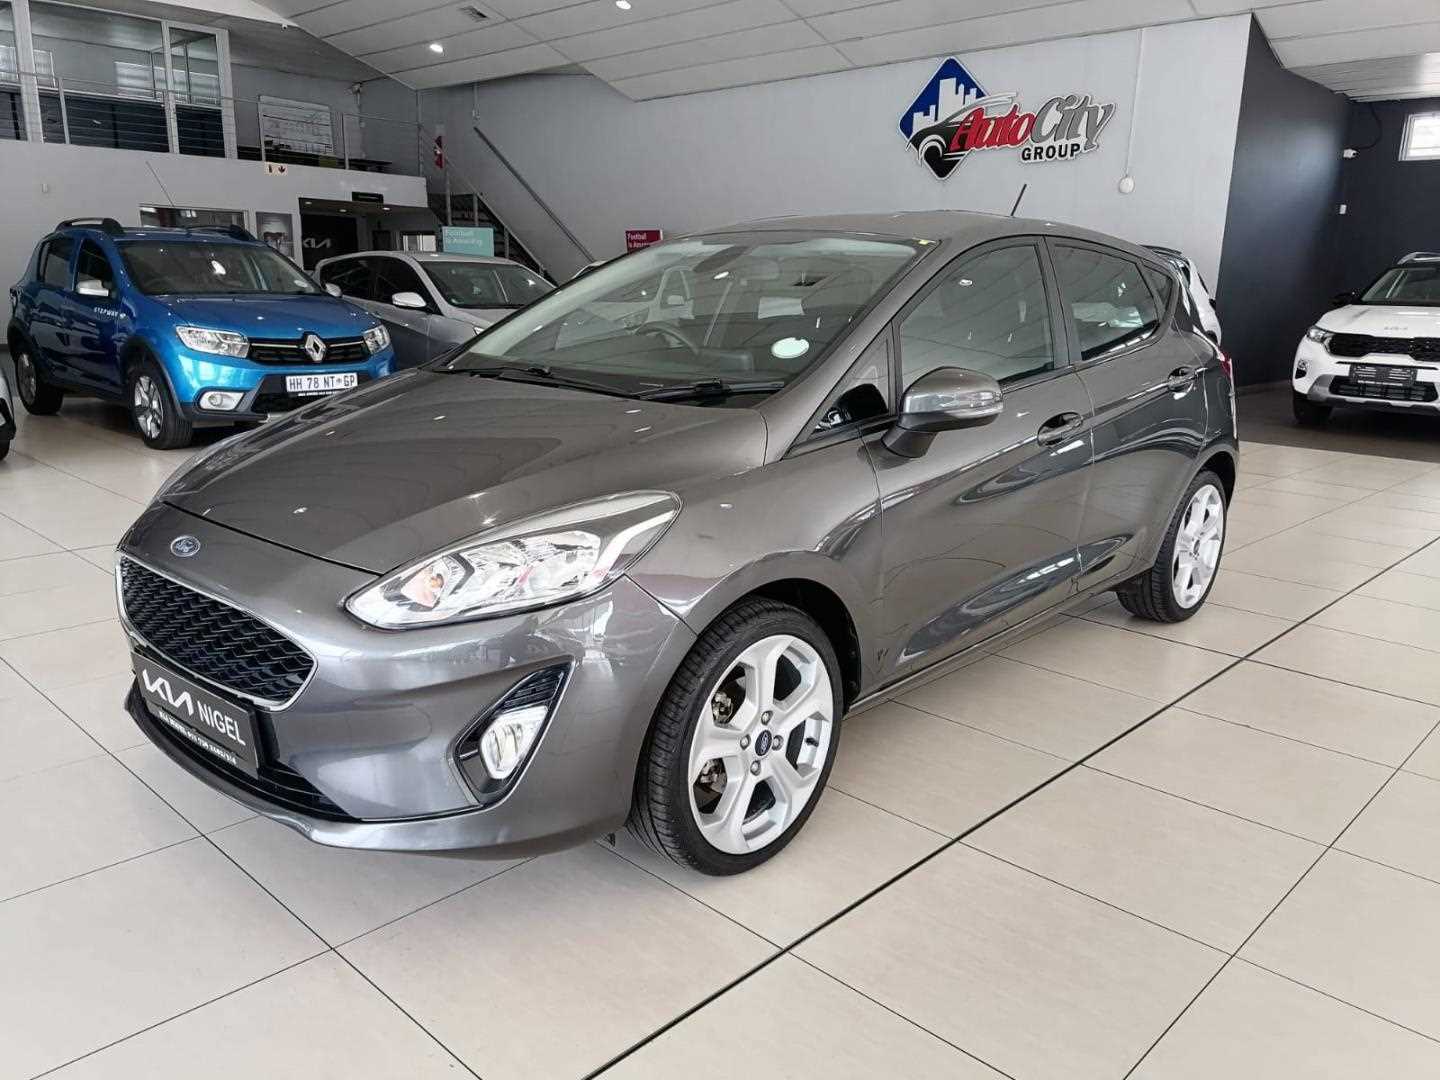 2019 Ford Fiesta 1.0 ECOBOOST TREND 5DR